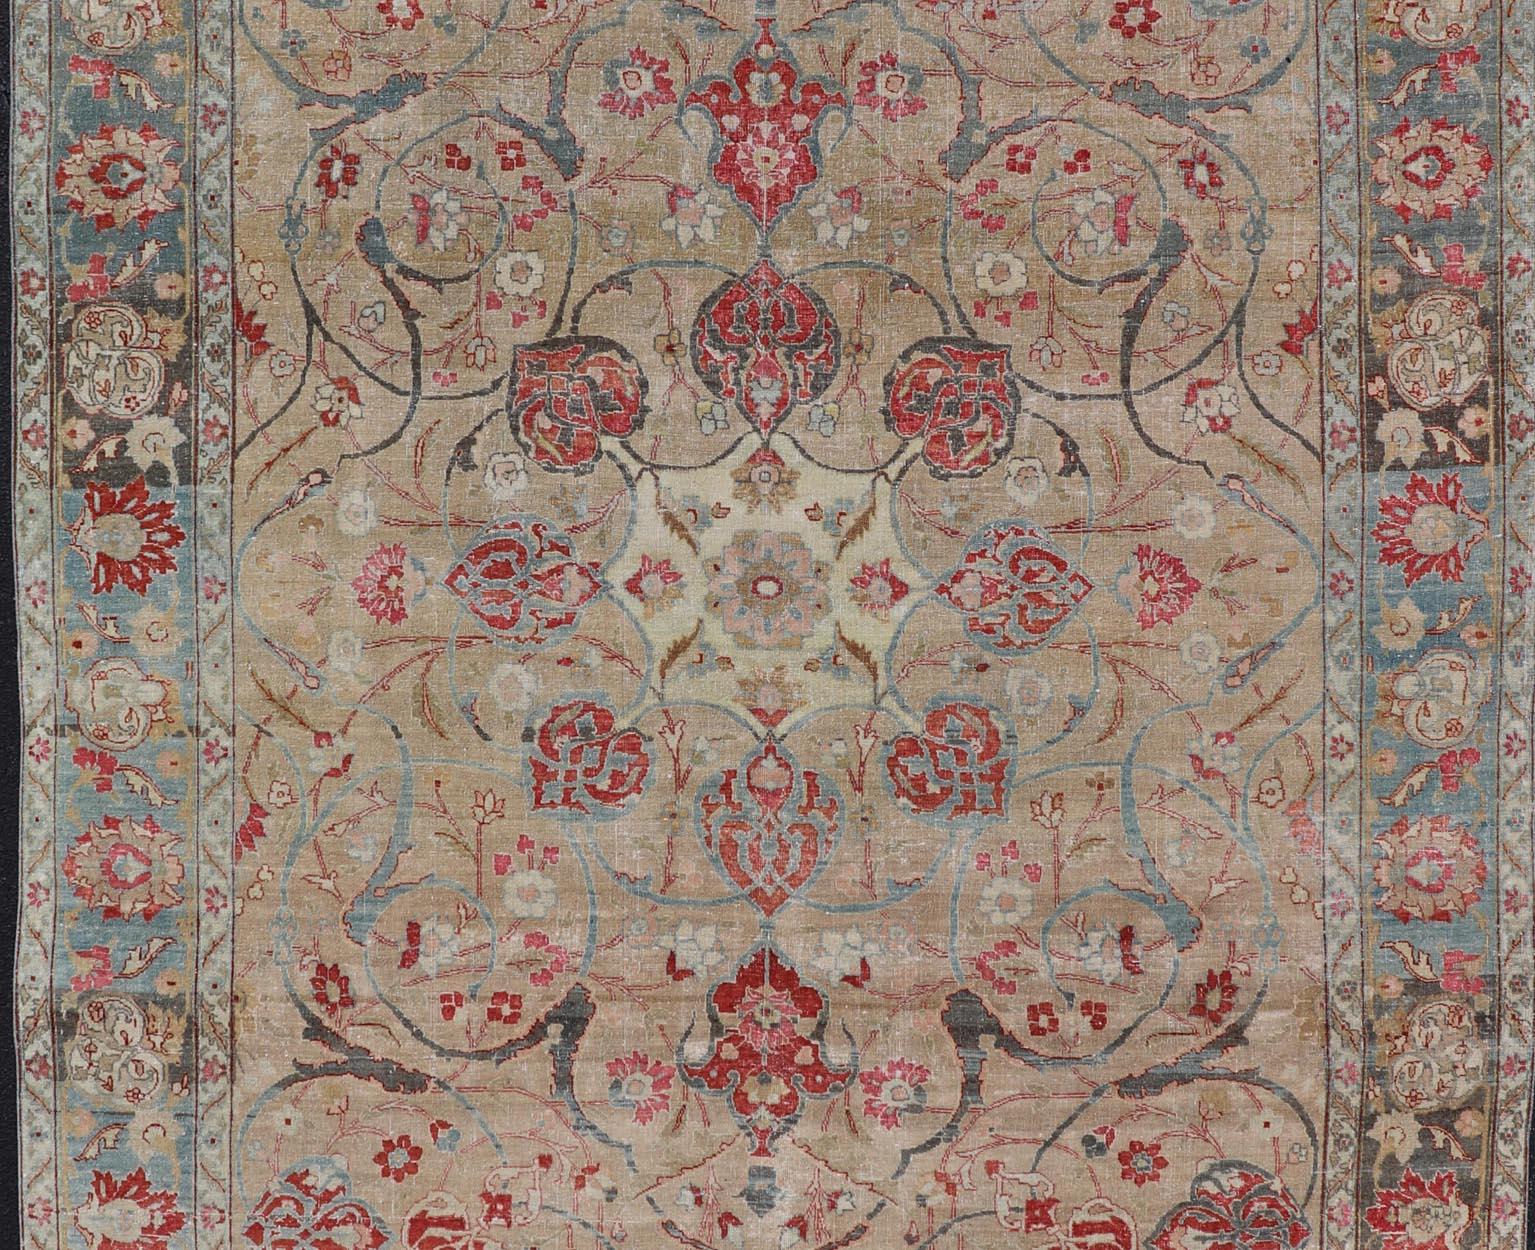 Antique Persian Tabriz Rug with Floral Medallion Design in Tan, Red, and Blue For Sale 1